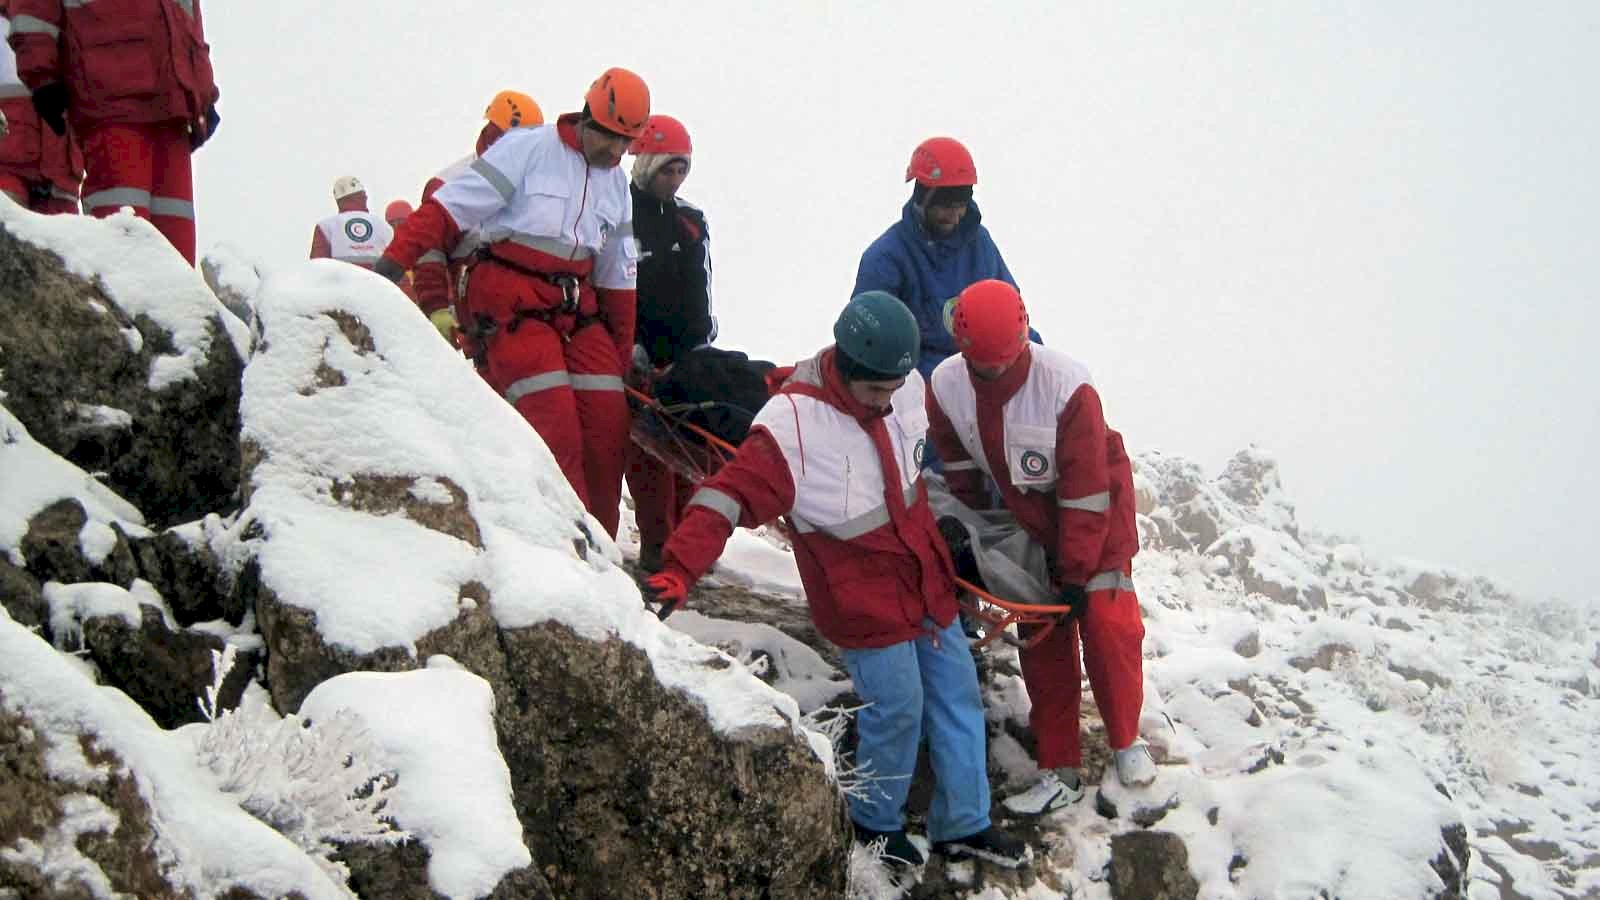 Mountain Rescue team evacuating a stretcher casualty off the mountain in snowy terrain.